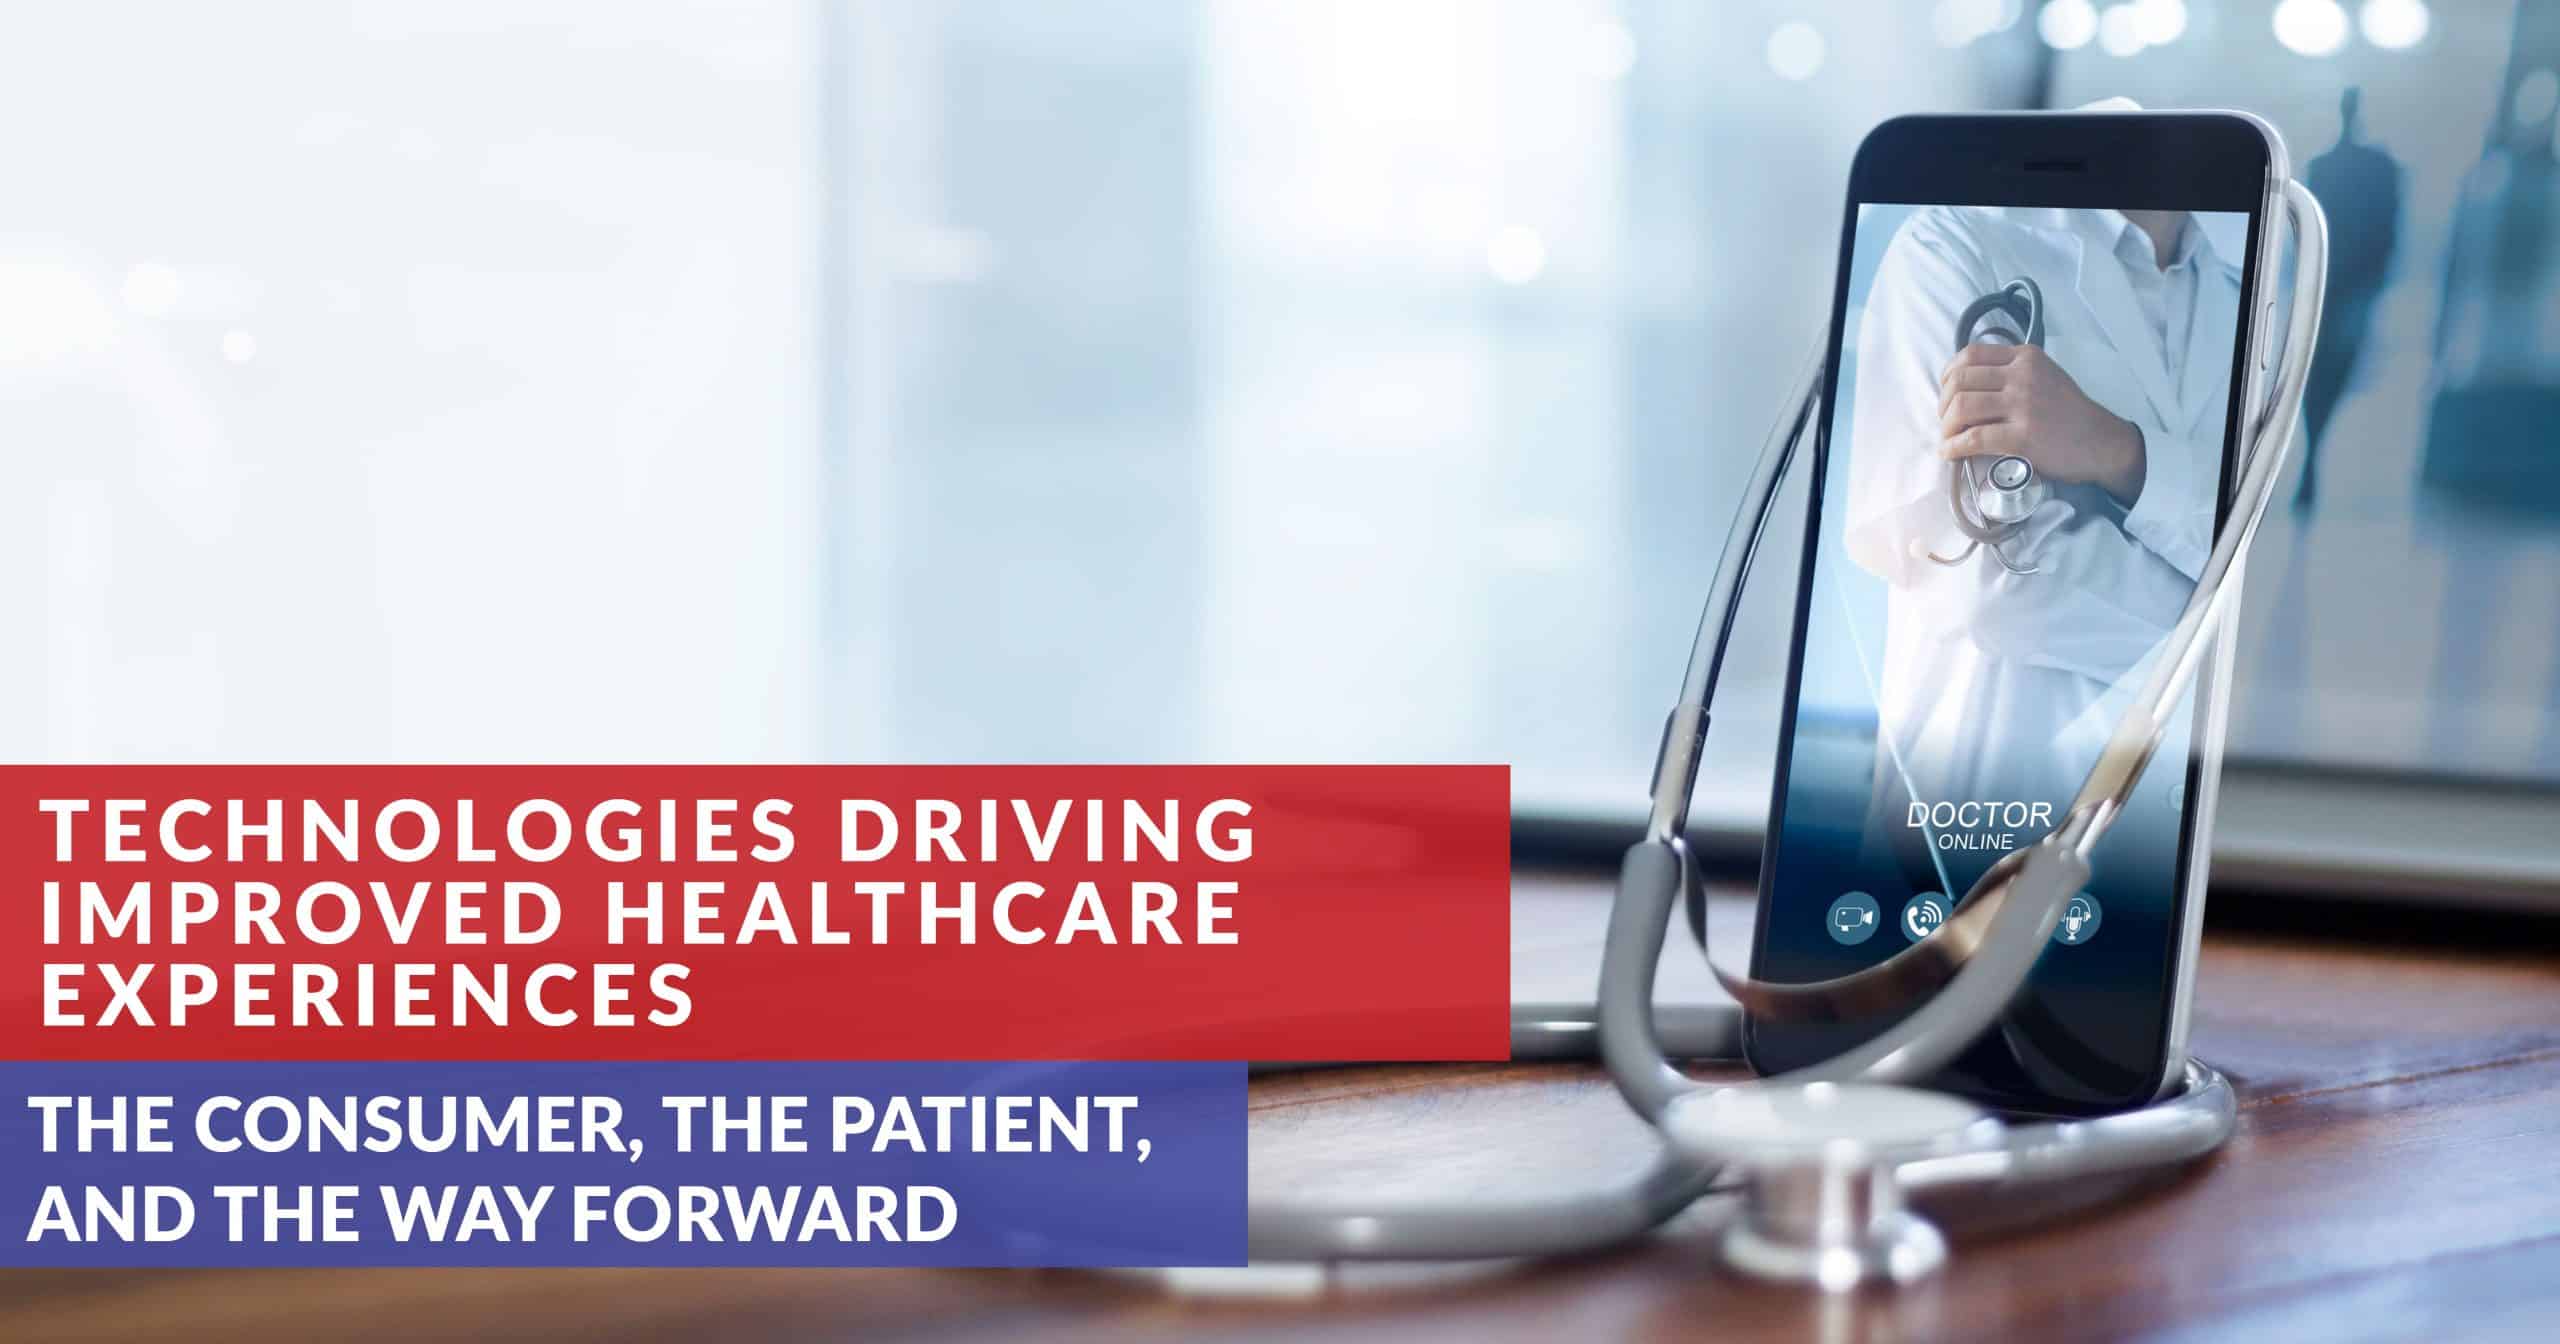 Technologies Driving Improved Healthcare Experiences